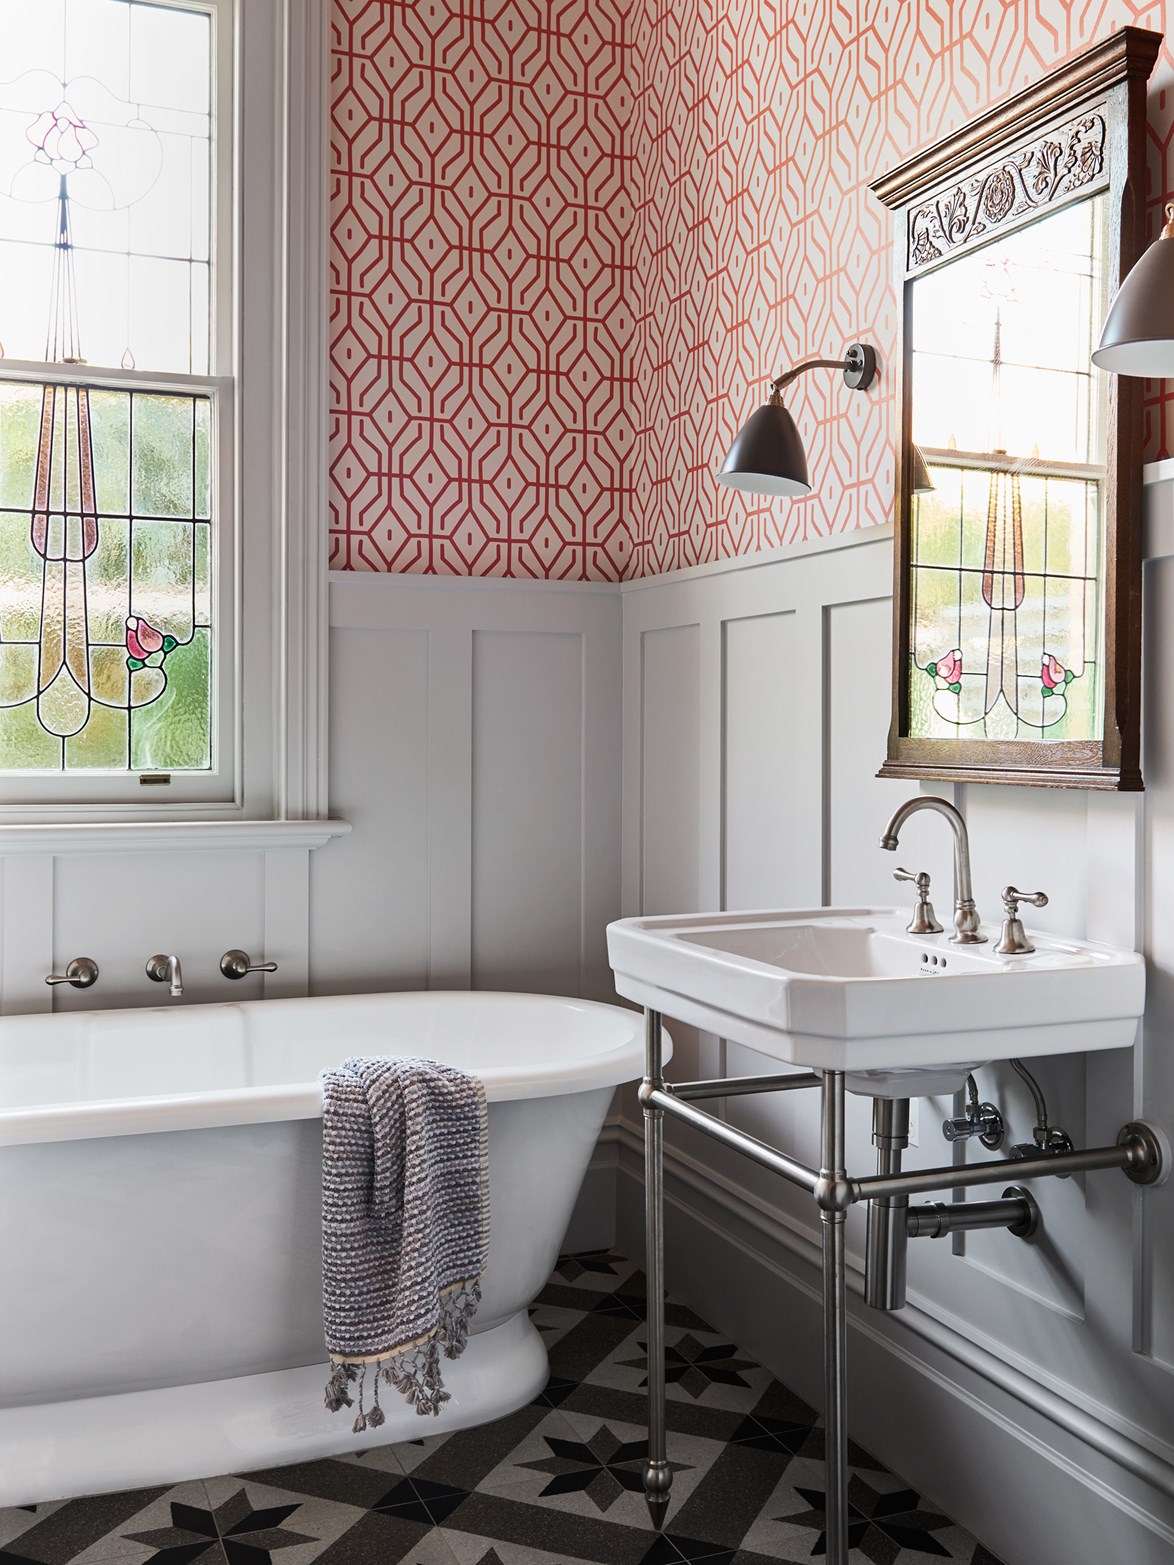 Inspired by the work of Ilse Crawford and without the need to include a shower, [this chic bathroom](https://www.homestolove.com.au/8-bathrooms-with-a-hint-of-glamour-1-6024|target="_blank") was treated with more decorative 'dry' finishes around the freestanding bathtub, with striking geometric wallpaper and a chrome basin stand to add personality without cramping the space.